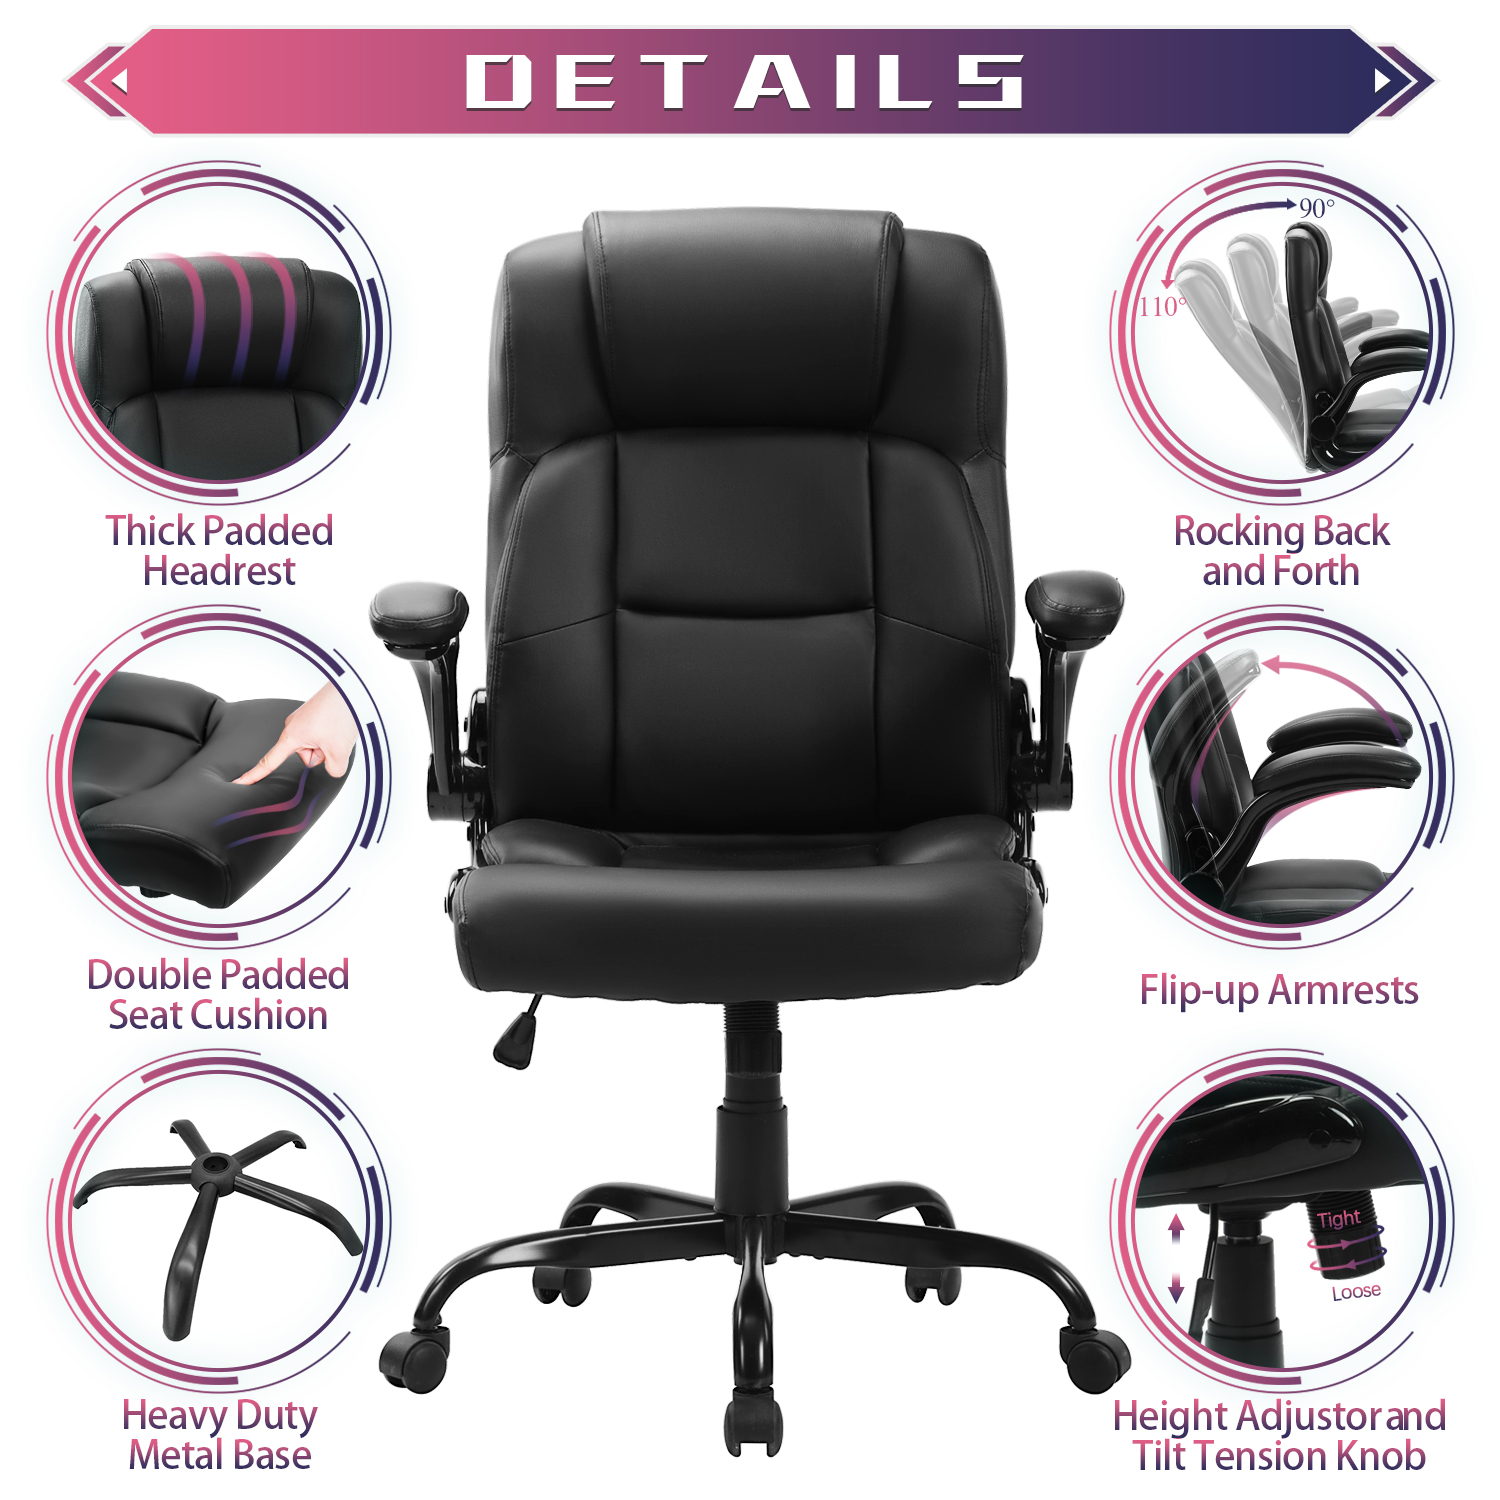 JONPONY Big and Tall Office Chair 400LBS Wide Seat Ergonomic Computer Desk Chair High Back Executive Leather Chair Adjustable Task Chair Lumbar Back Support 8 Hours Heavy Duty Design,Black - image 3 of 9